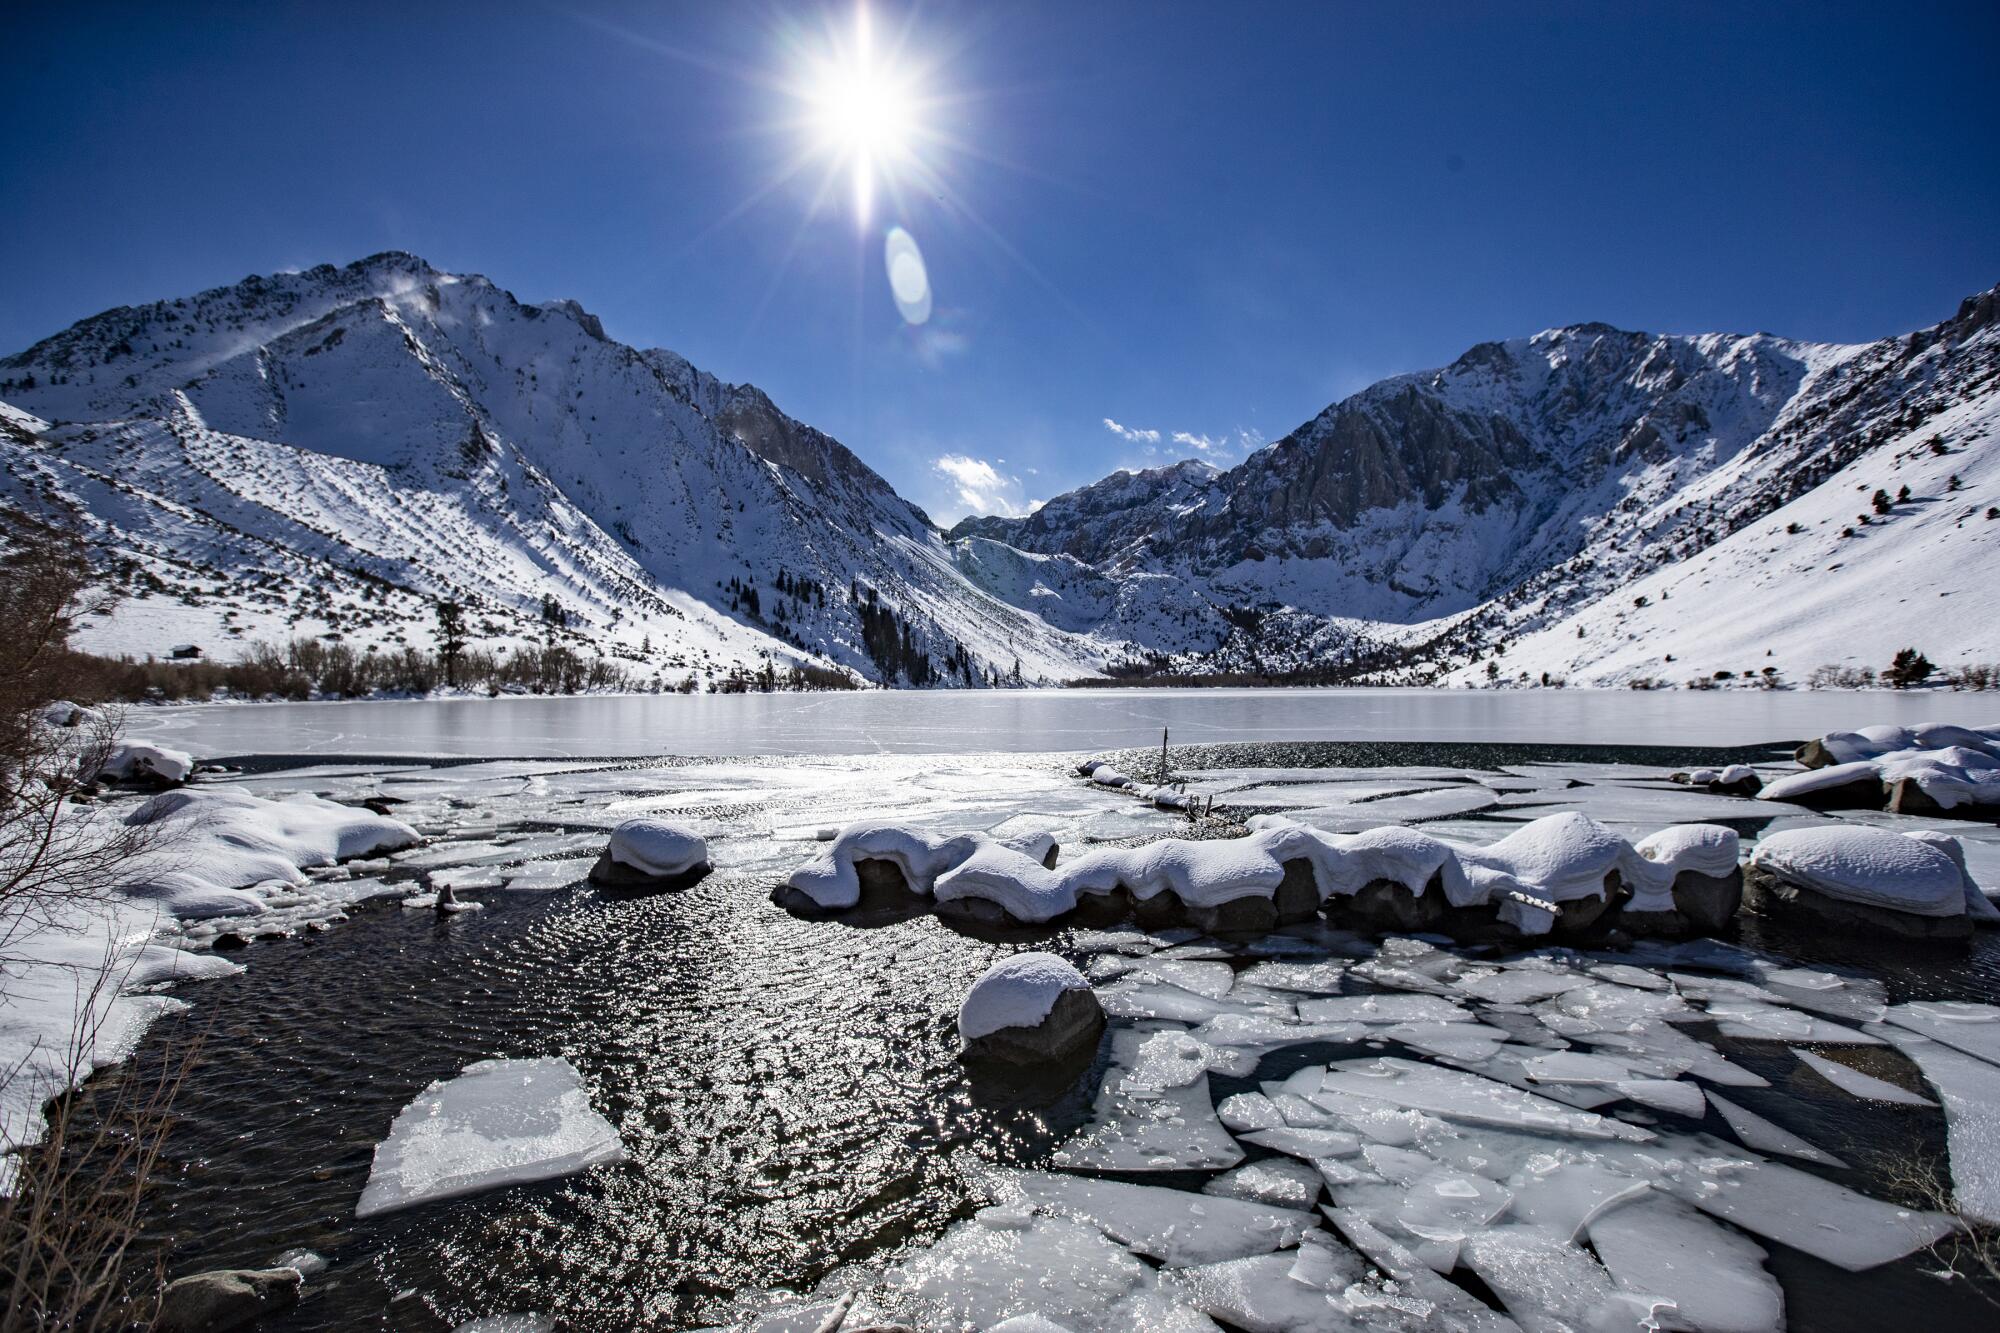 Ice breaks up at the mouth of Convict Creek overlooking Convict Lake and the Sierra Nevada range near Mammoth Lakes.